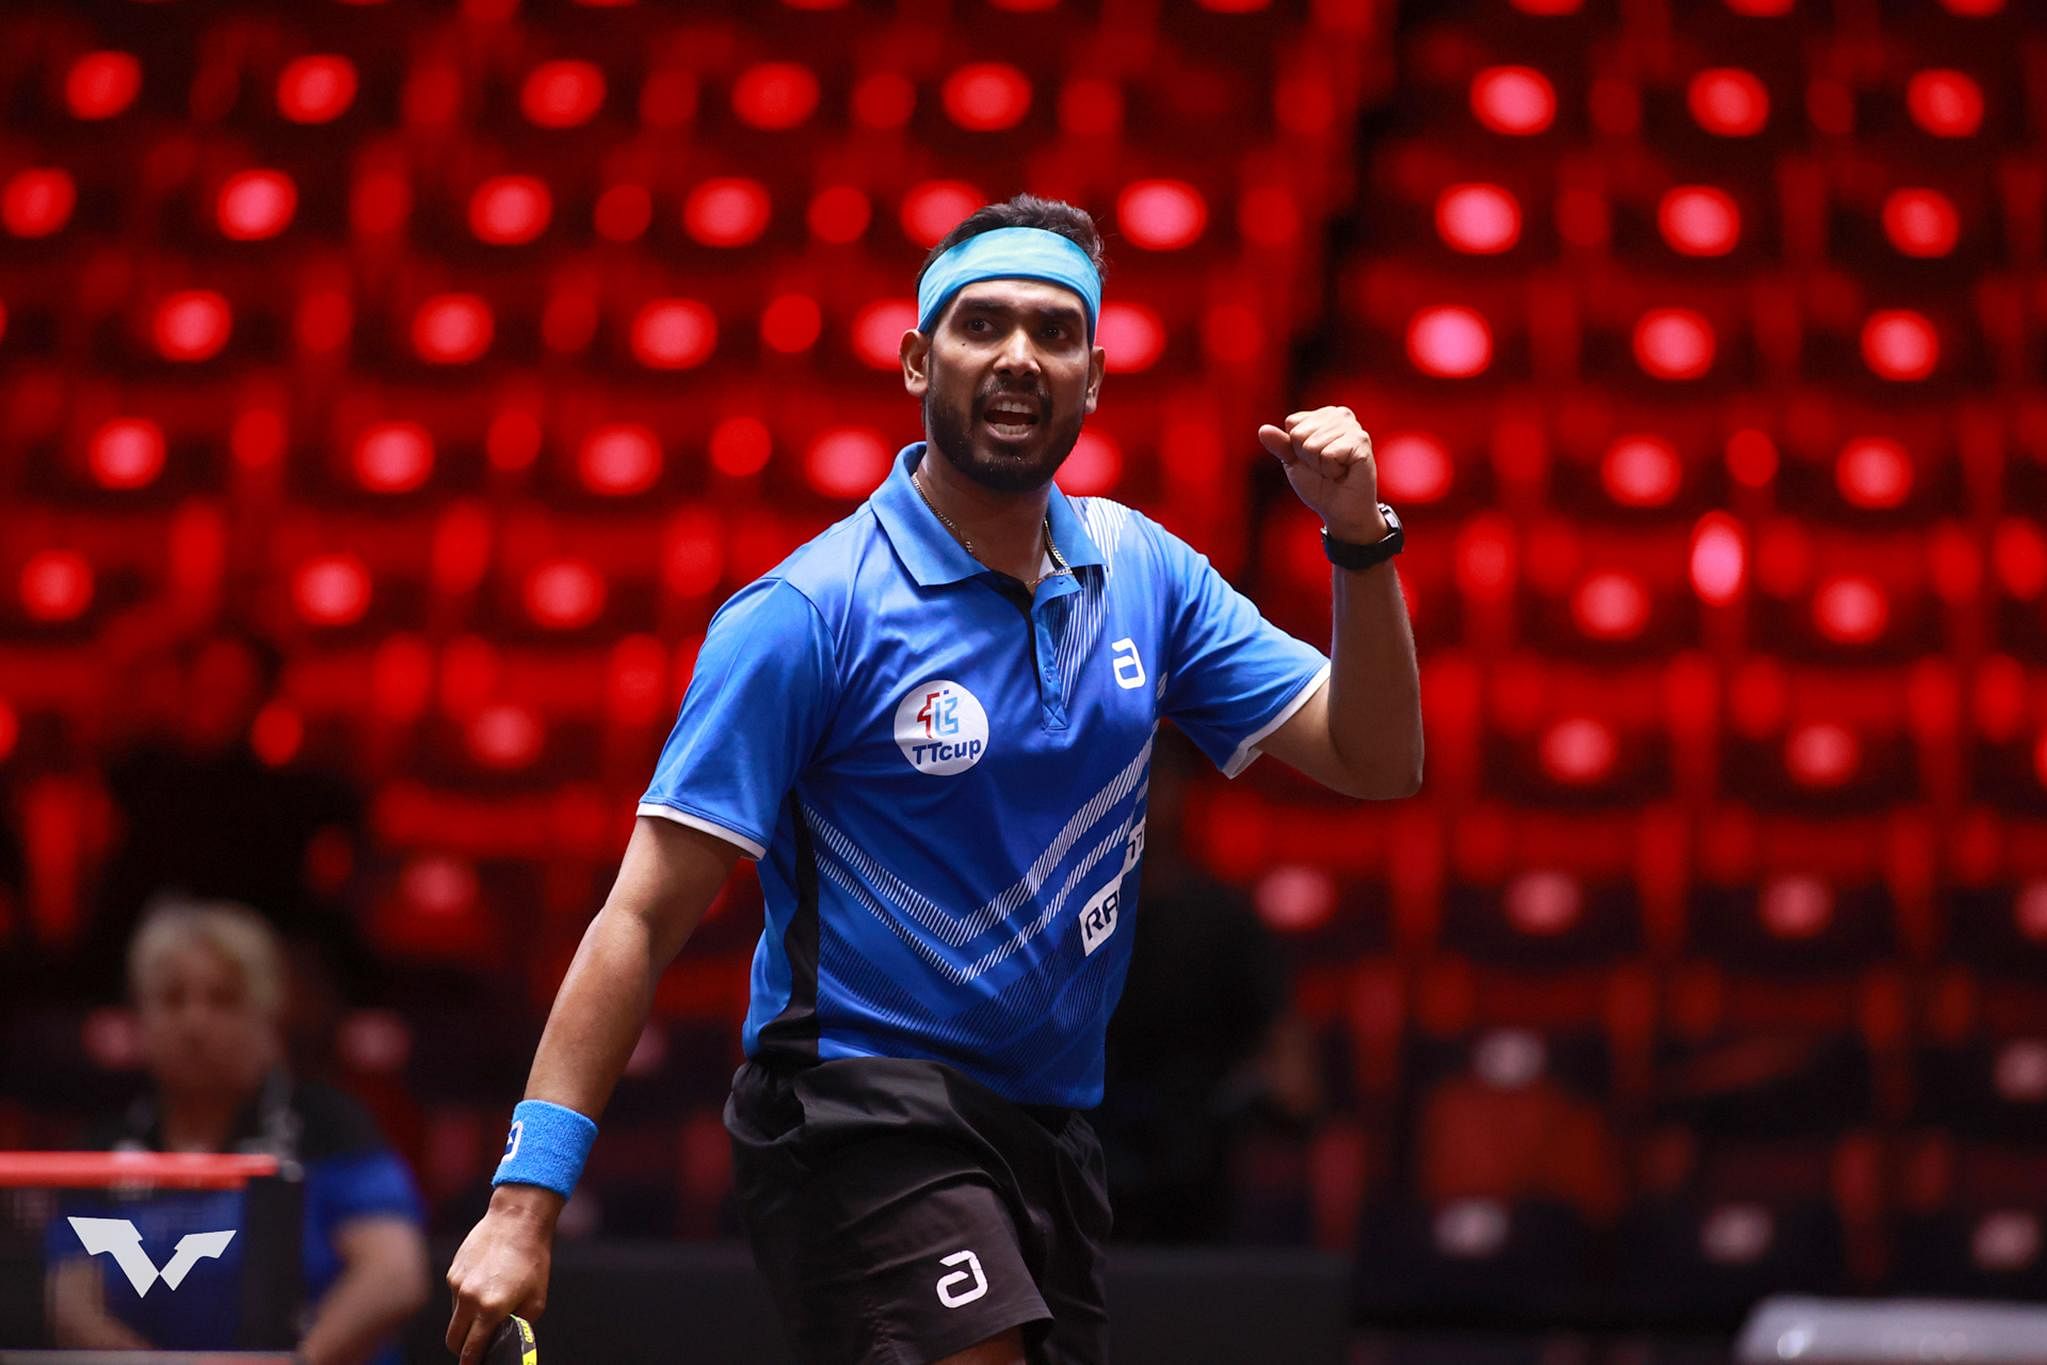 India rising to become a table tennis force